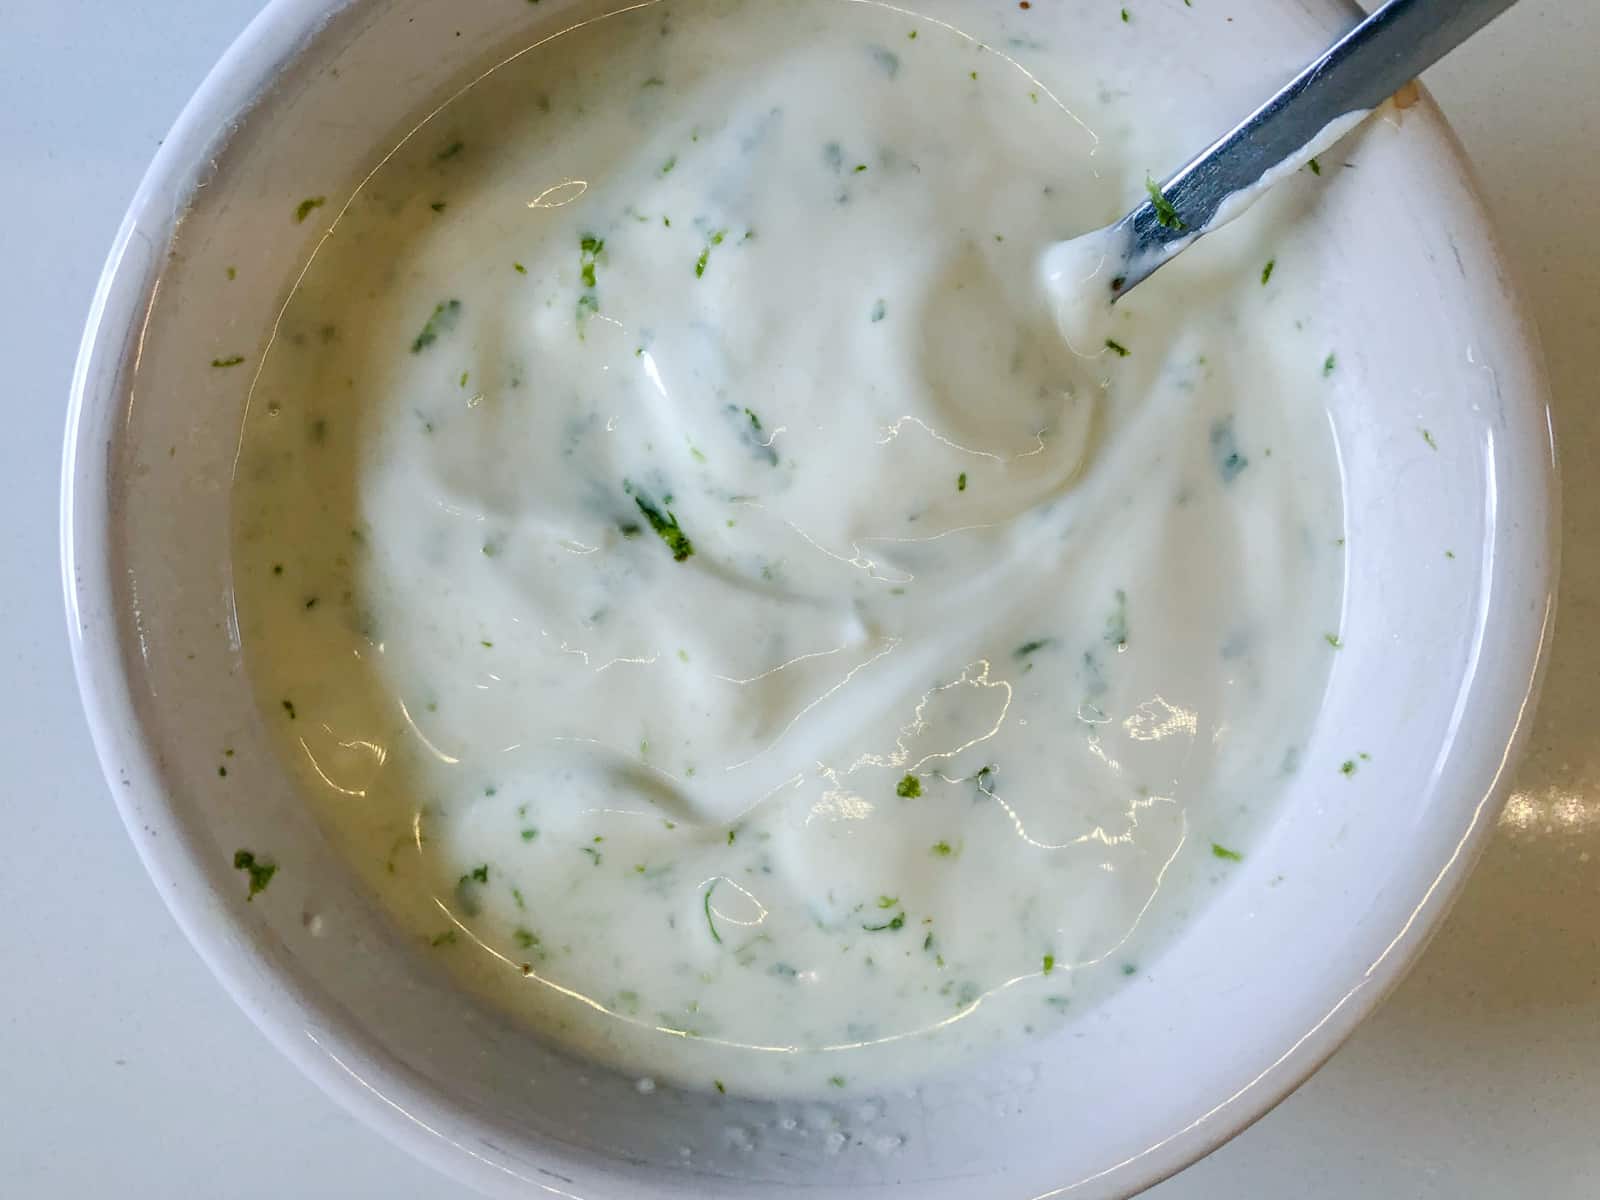 Lime cream in a white bowl.